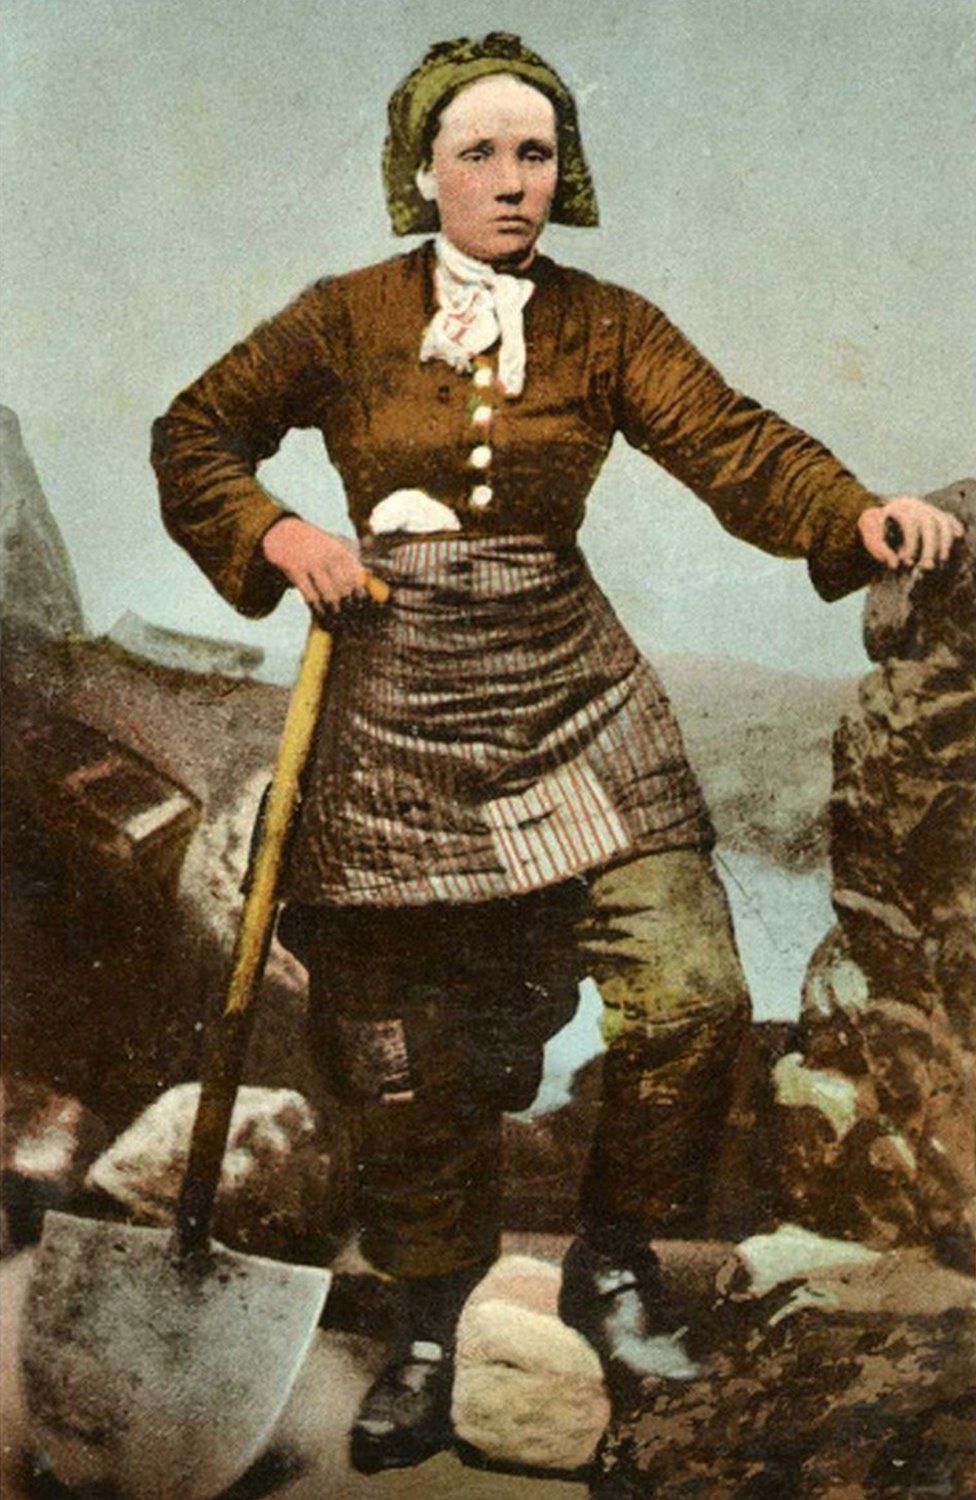 Pit brow lass shown on a postcard from the late 19th Century